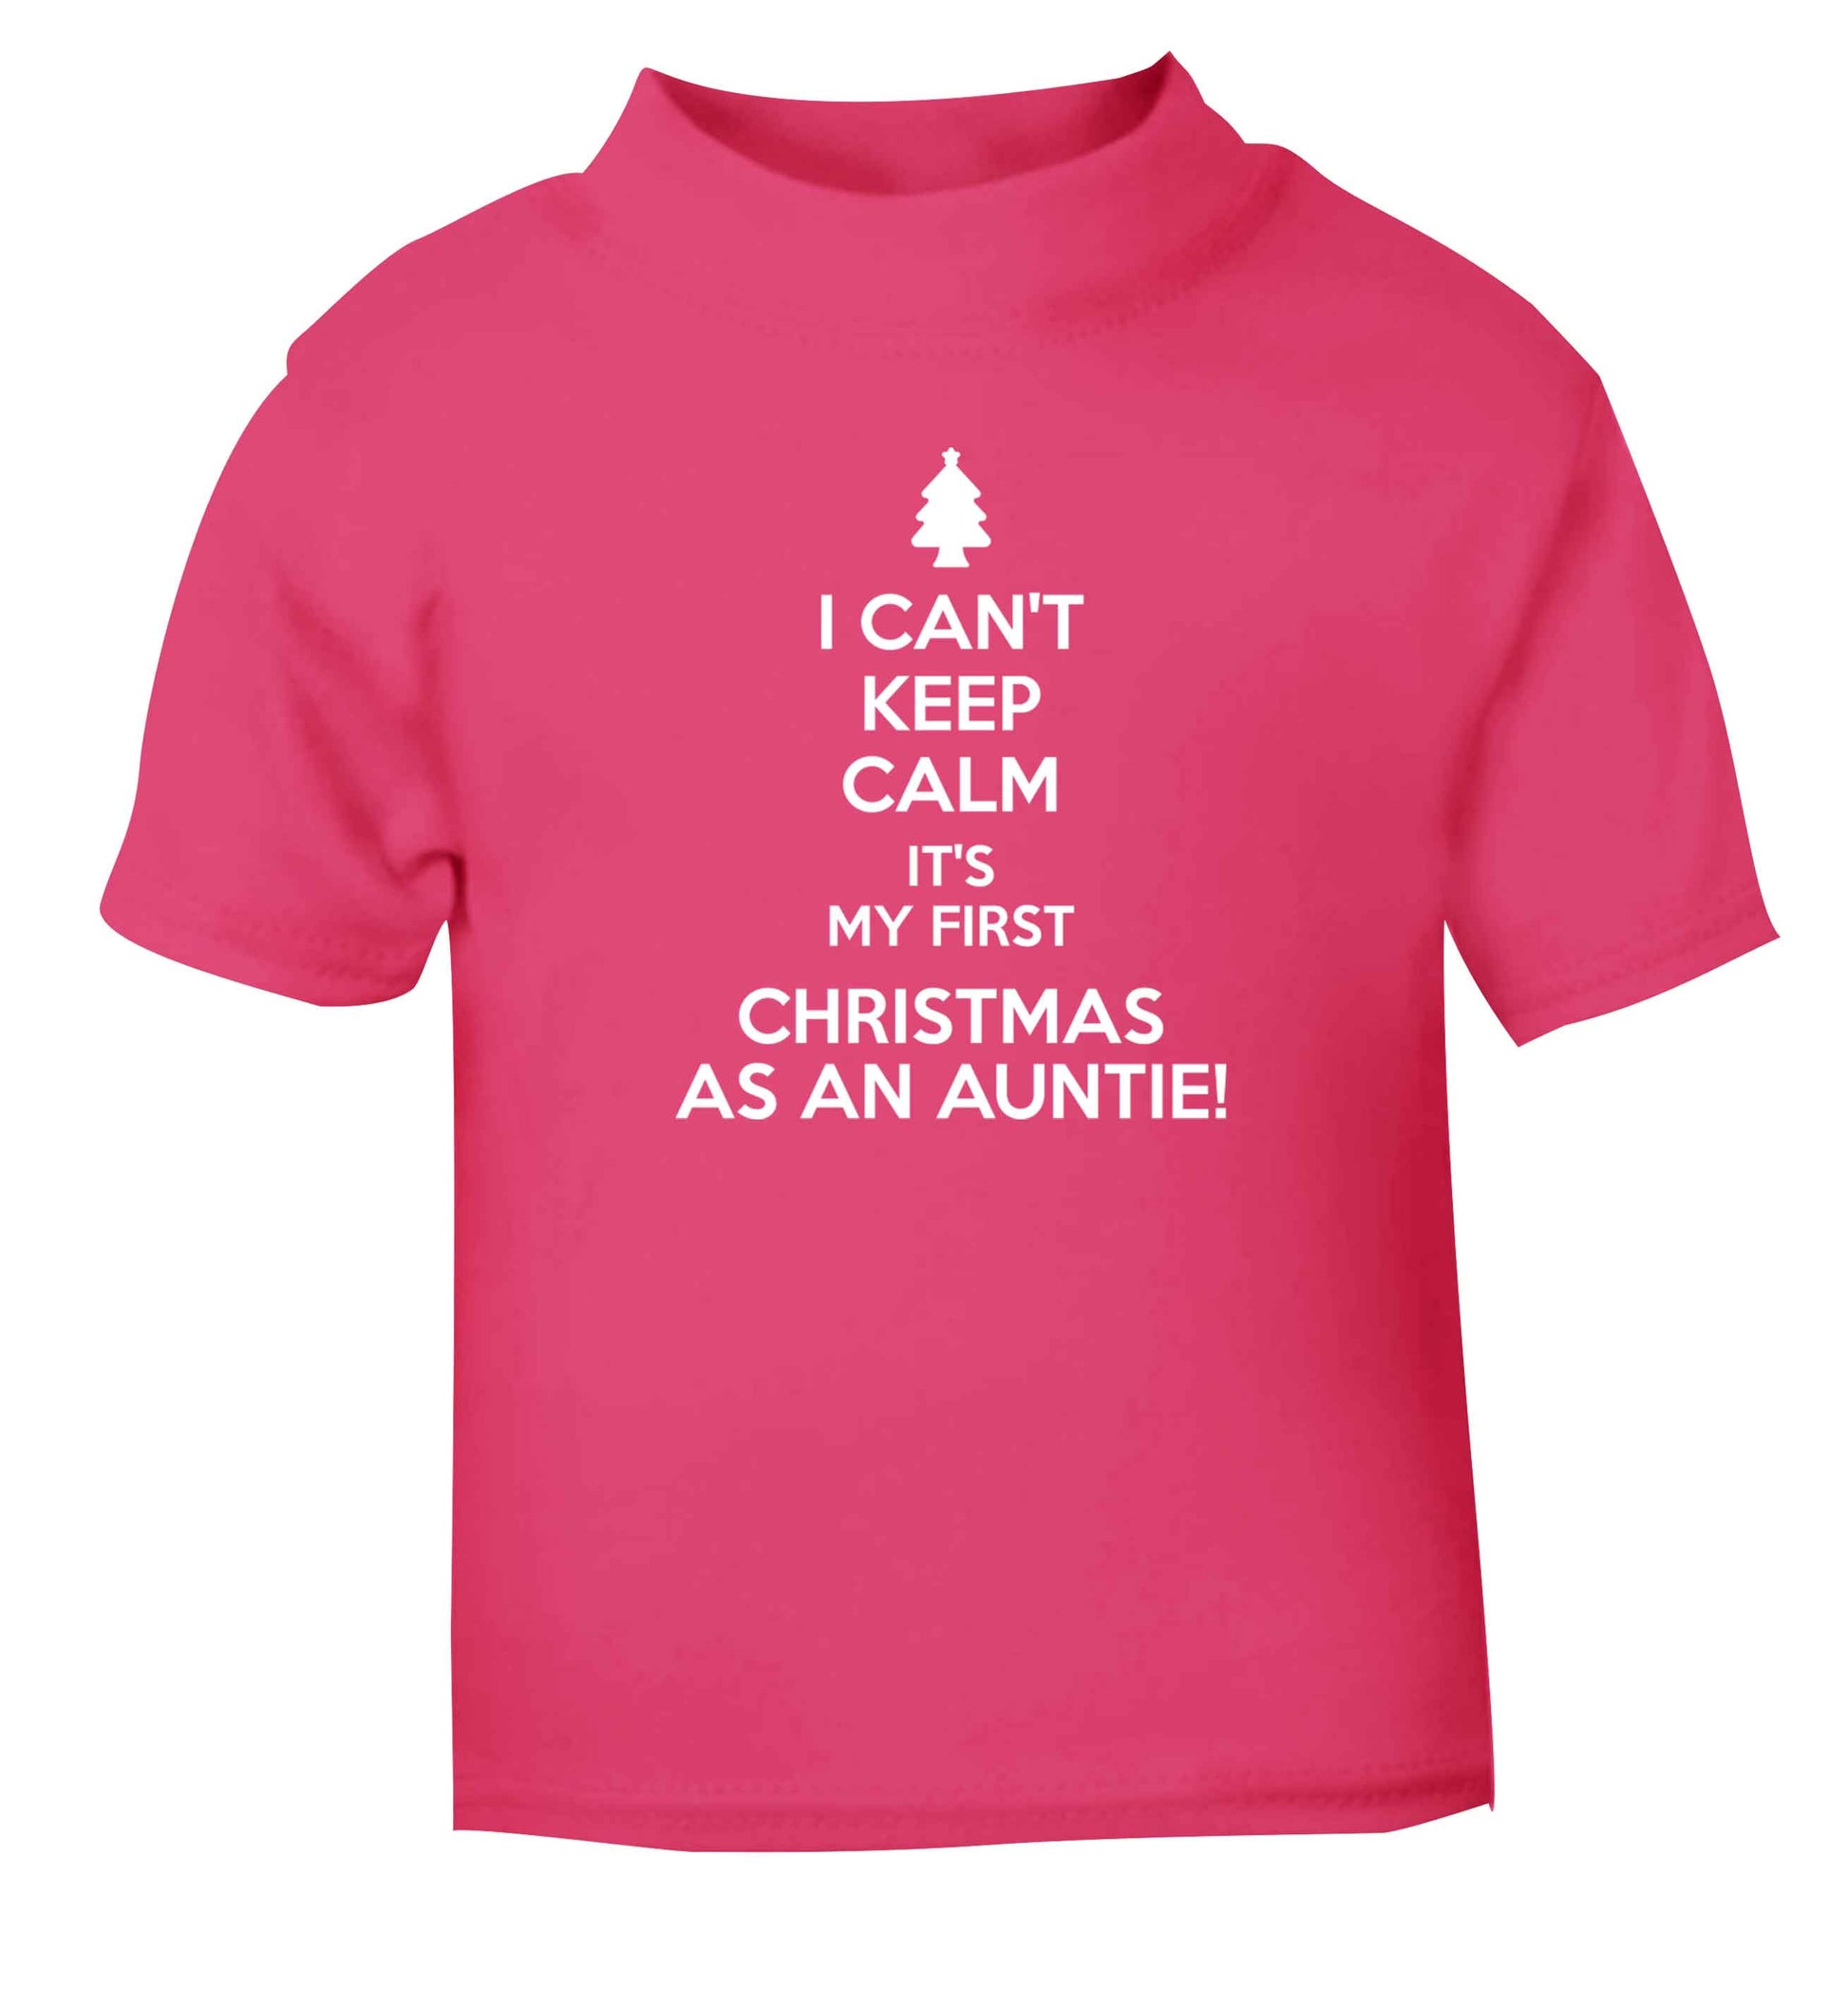 I can't keep calm it's my first Christmas as an auntie! pink Baby Toddler Tshirt 2 Years